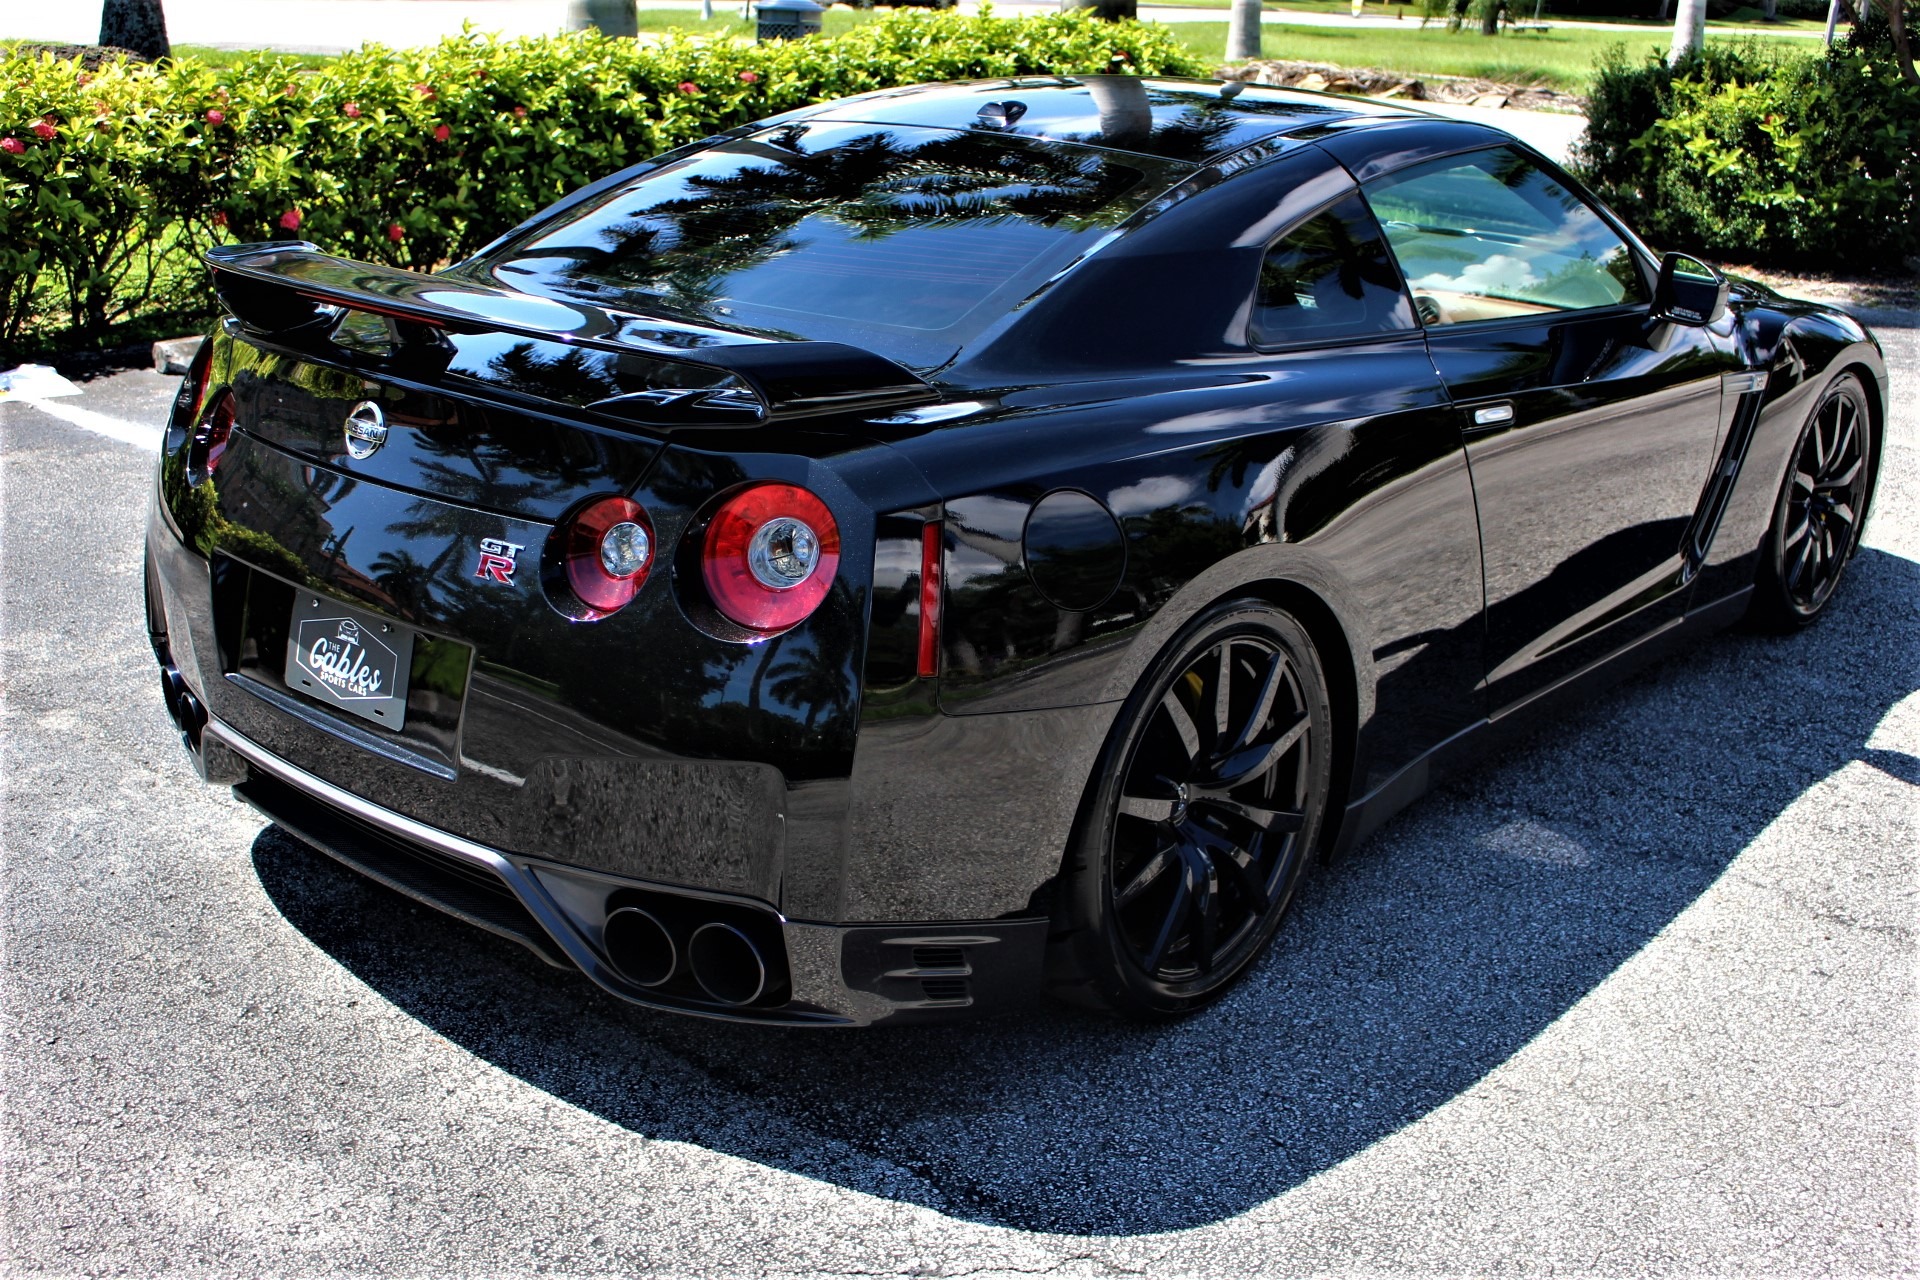 Used 2014 Nissan GT-R Premium for sale Sold at The Gables Sports Cars in Miami FL 33146 1